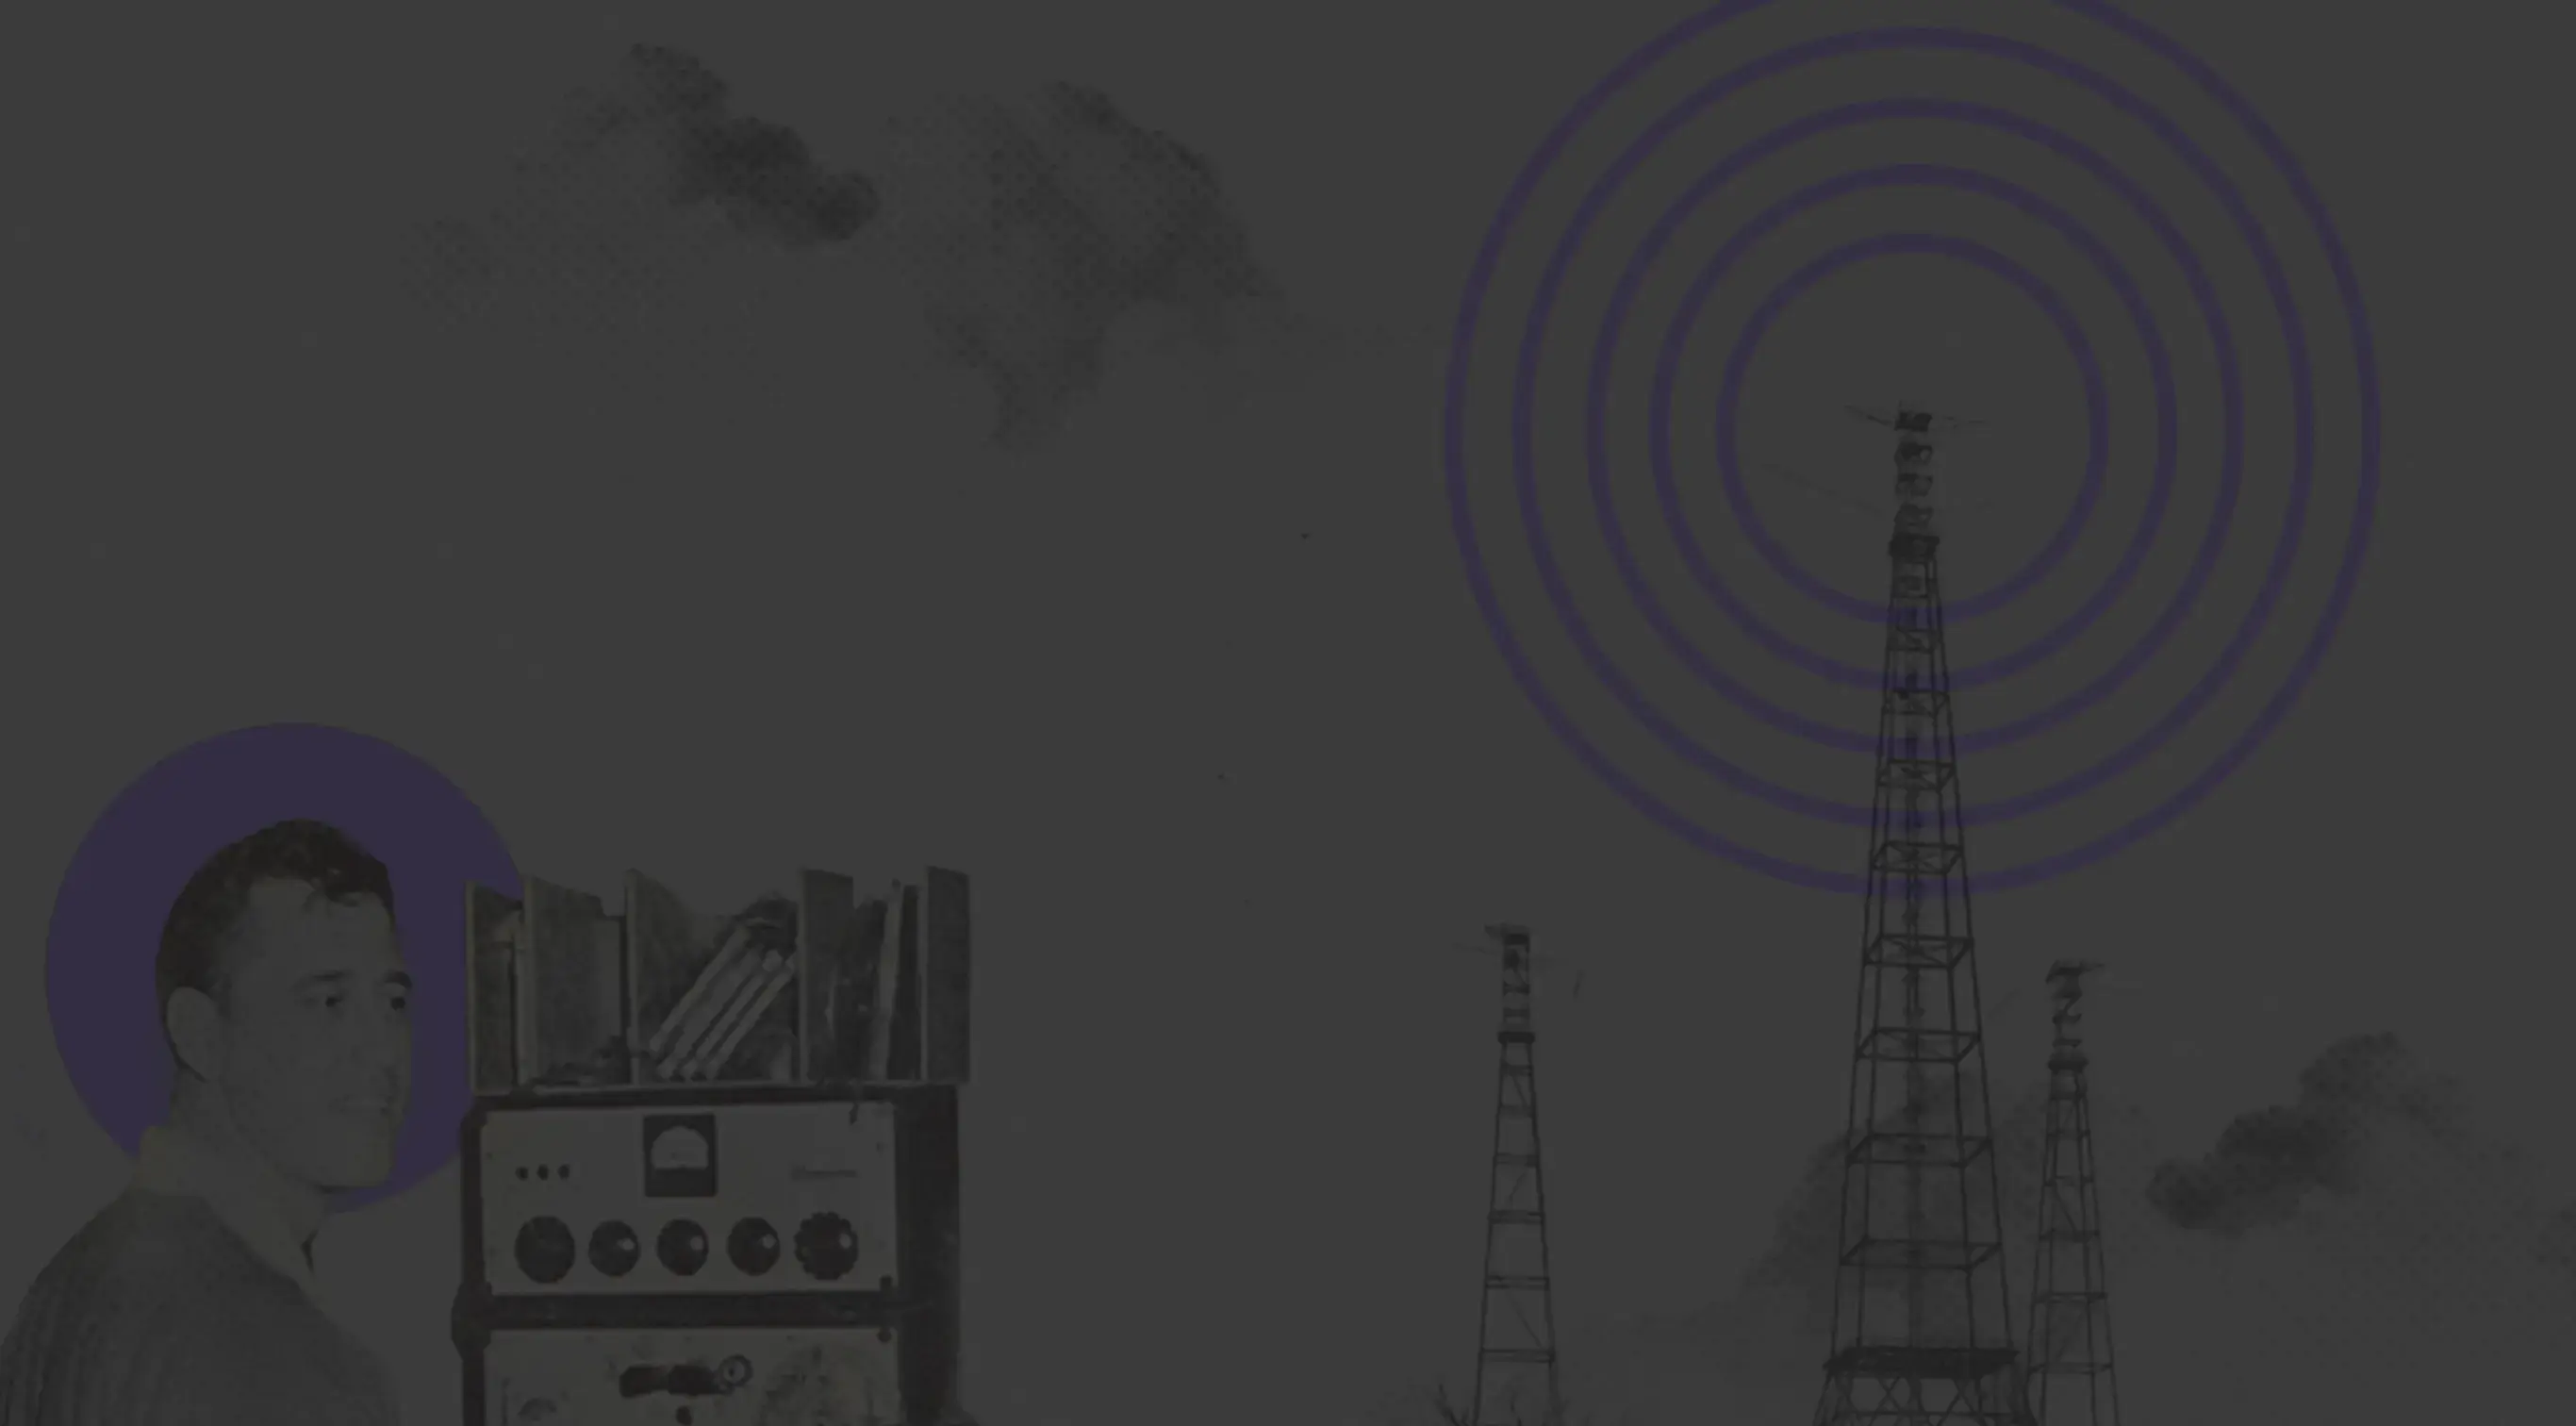 collage of images including a man, a radio tower with radio waves emitting, old timey radio equipment